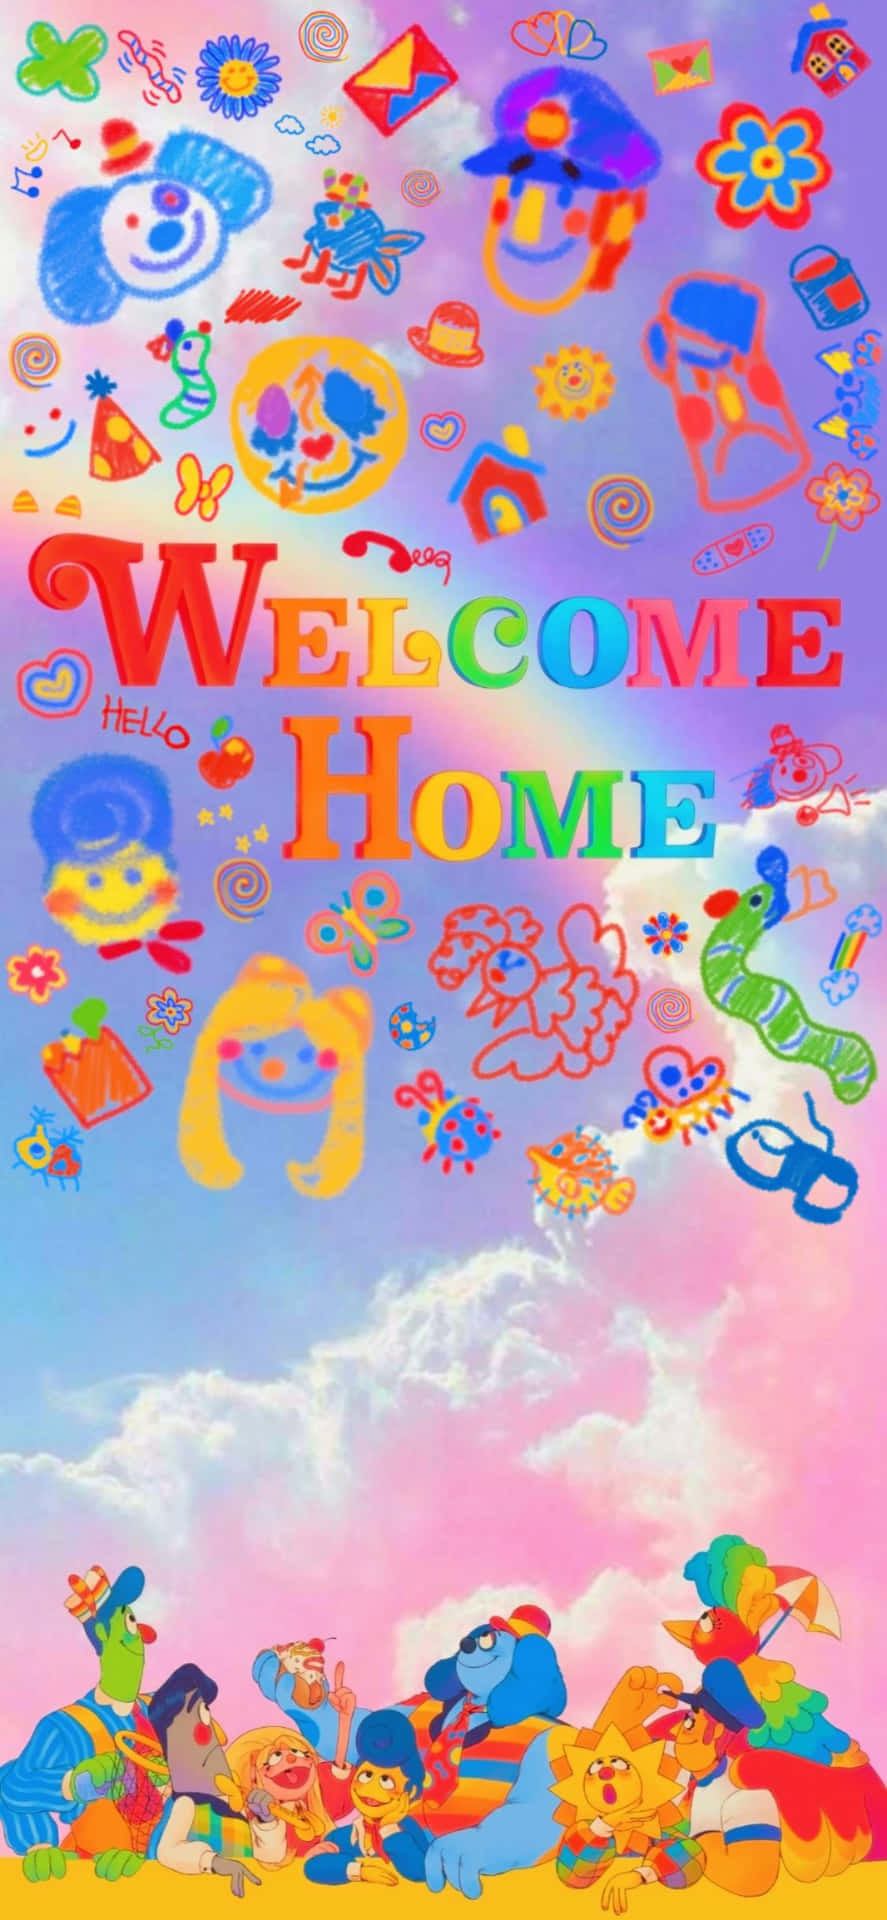 Welcome Home Puppet Show Banner Wallpaper